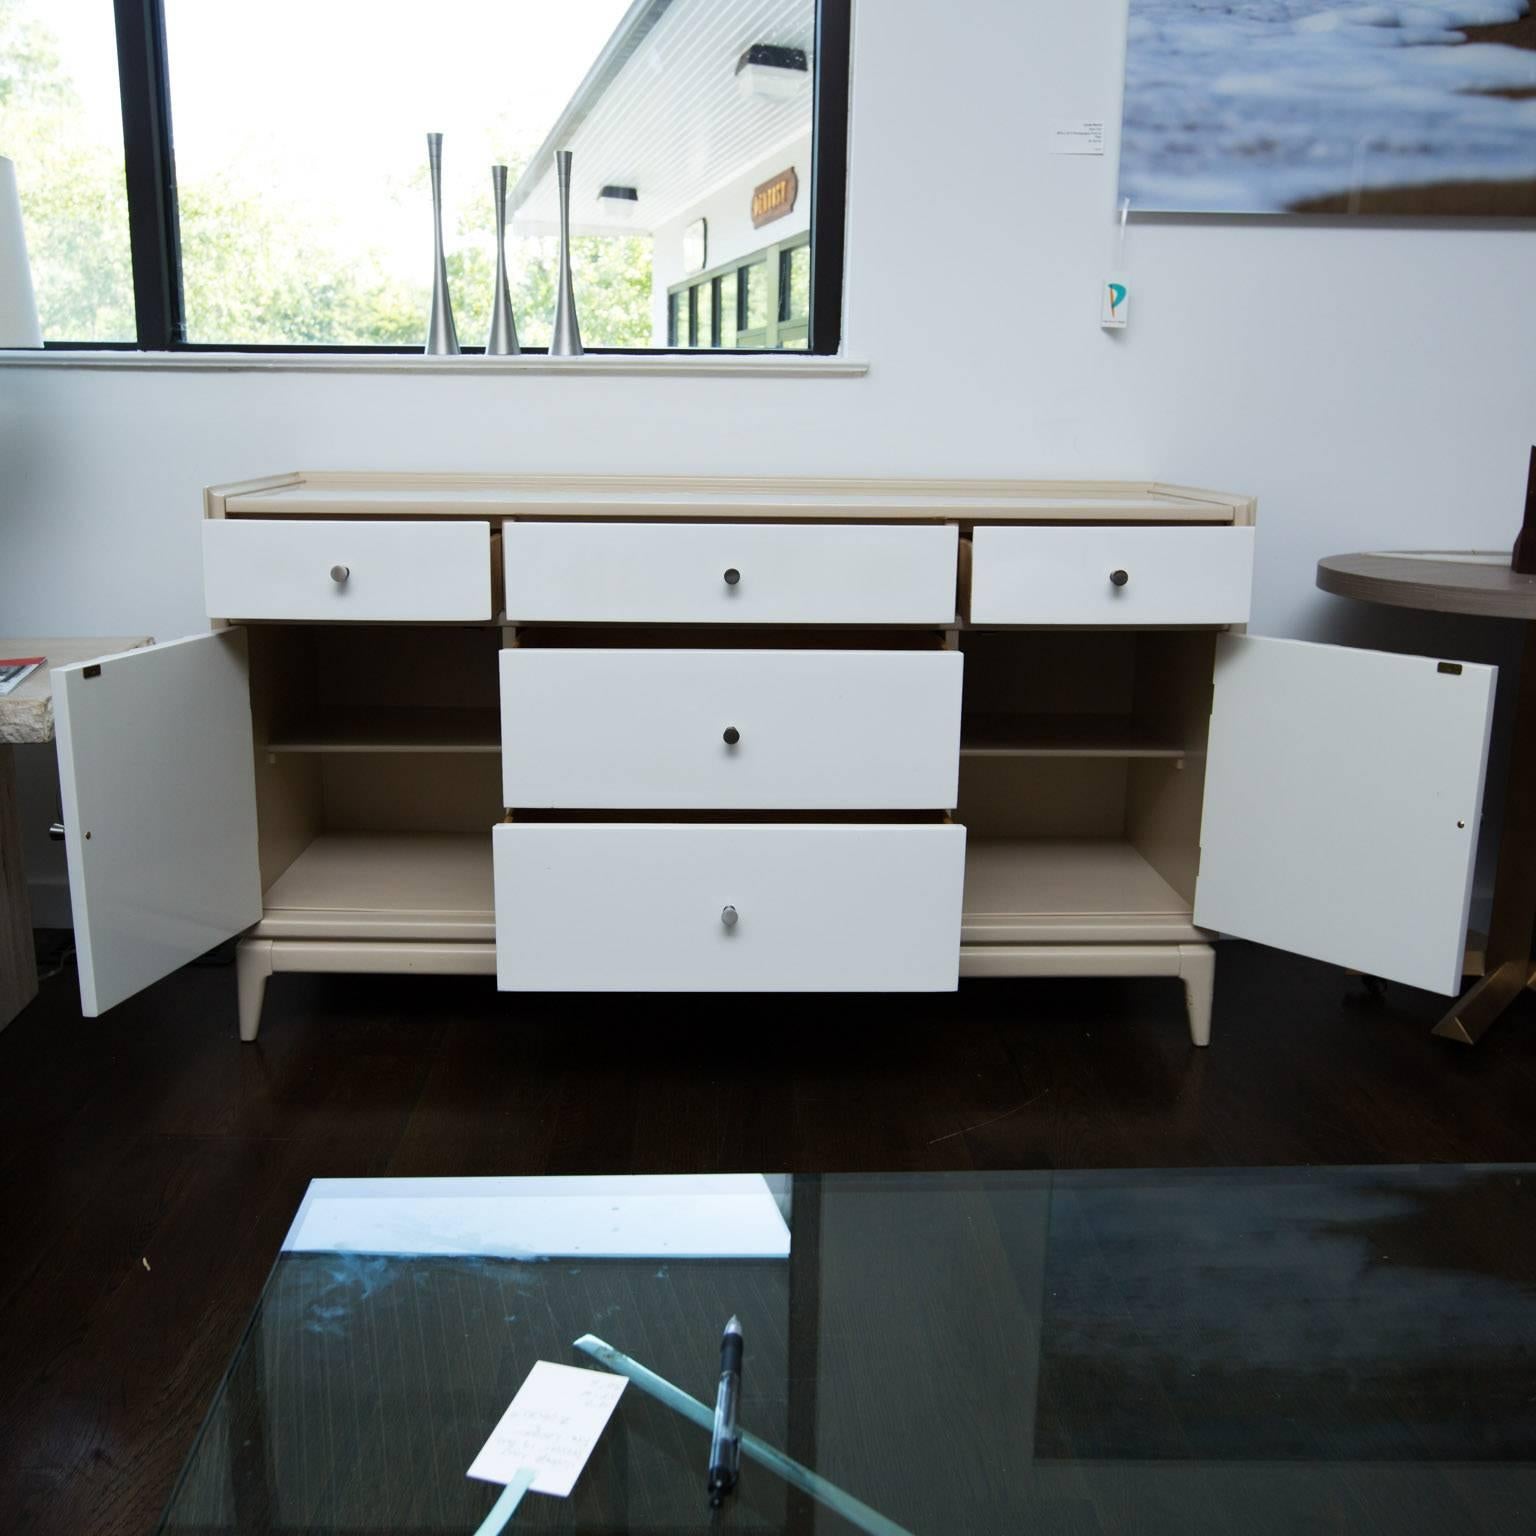 Nice vintage piece that's been given anew life with new brushed aluminum drawer pulls and a contemporary two-toned beige and white lacquer. Could easily double as a dresser.